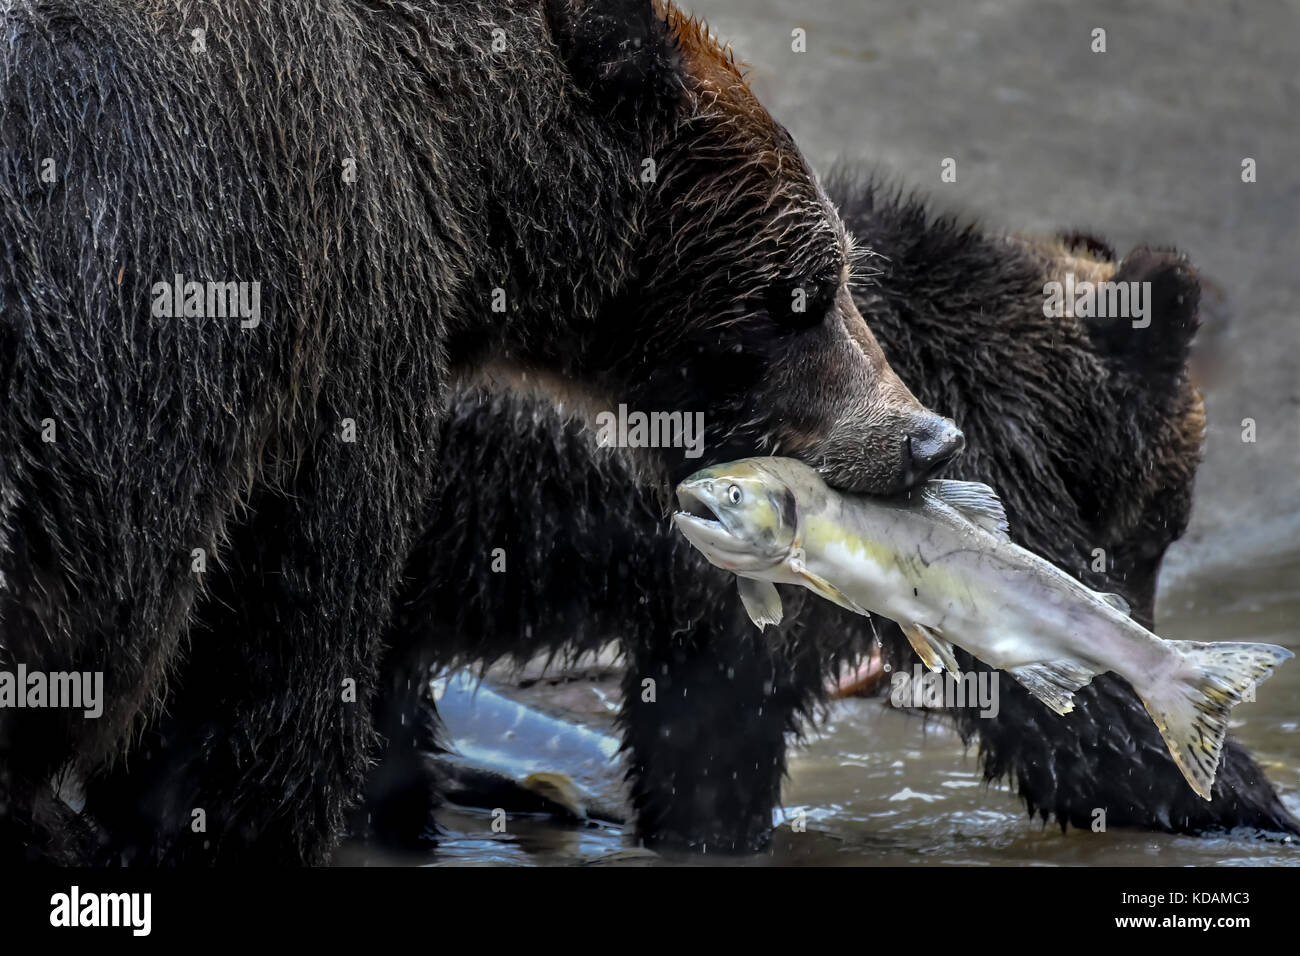 Grizzly bear with a fish in her mouth and her cub, Effingham Inlet, British Columbia, Canada Stock Photo